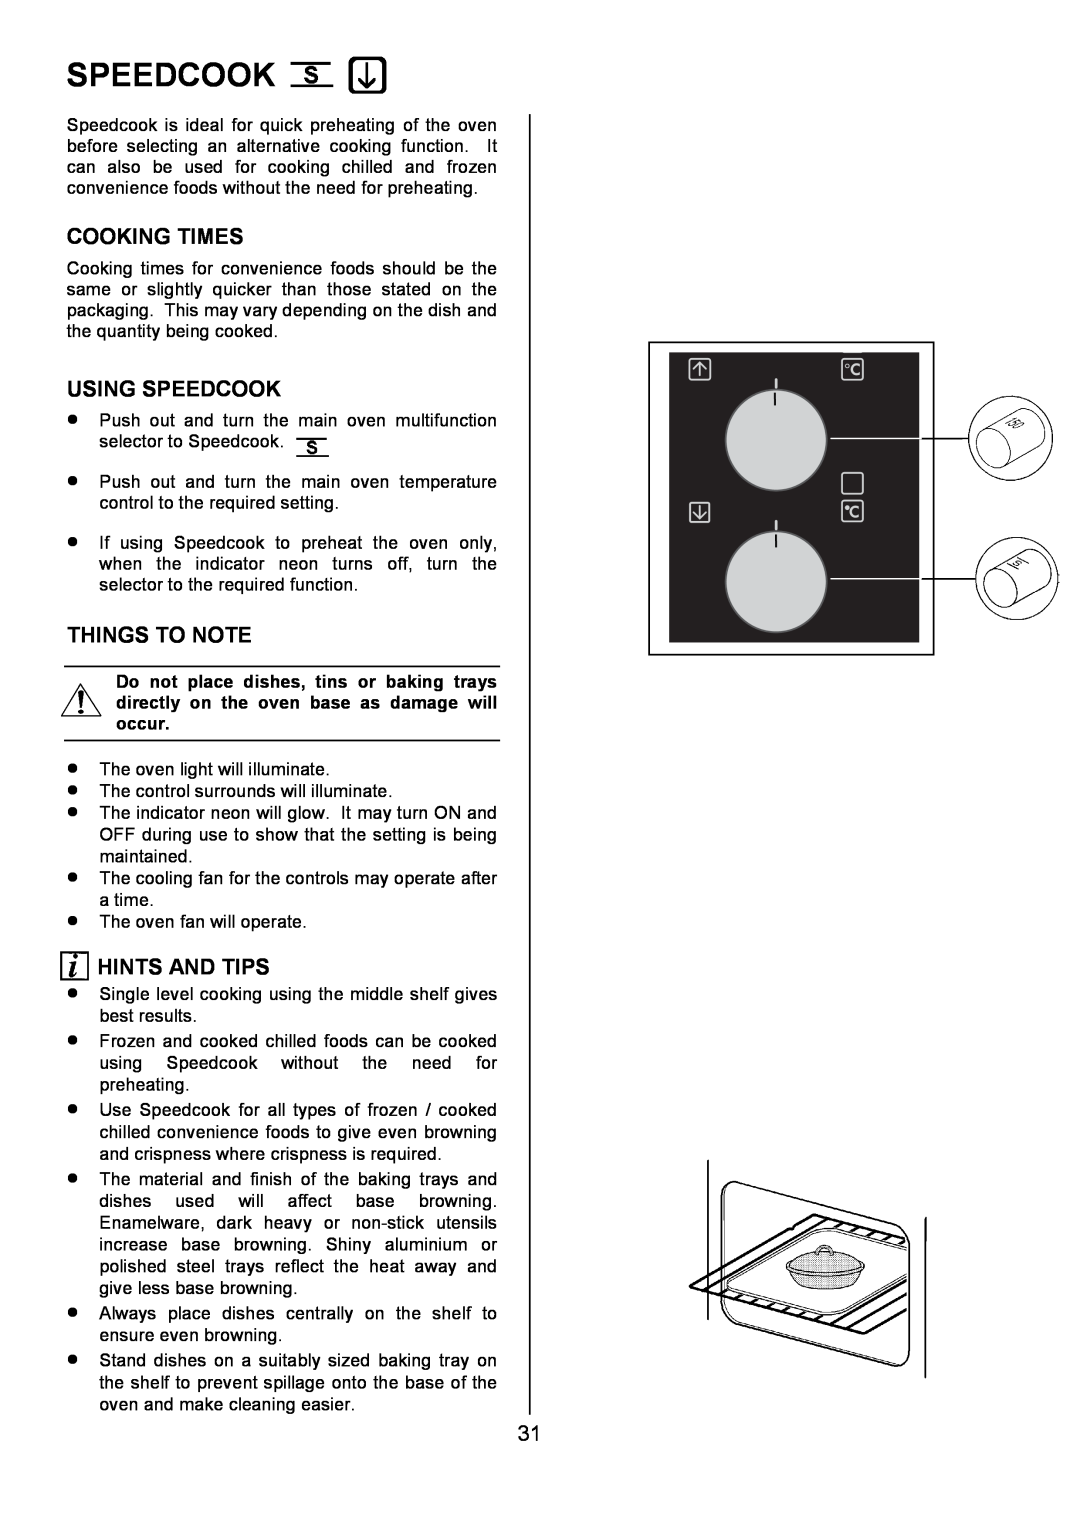 Electrolux U7101-4 operating instructions Using Speedcook, Cooking Times, Things To Note, Hints And Tips 